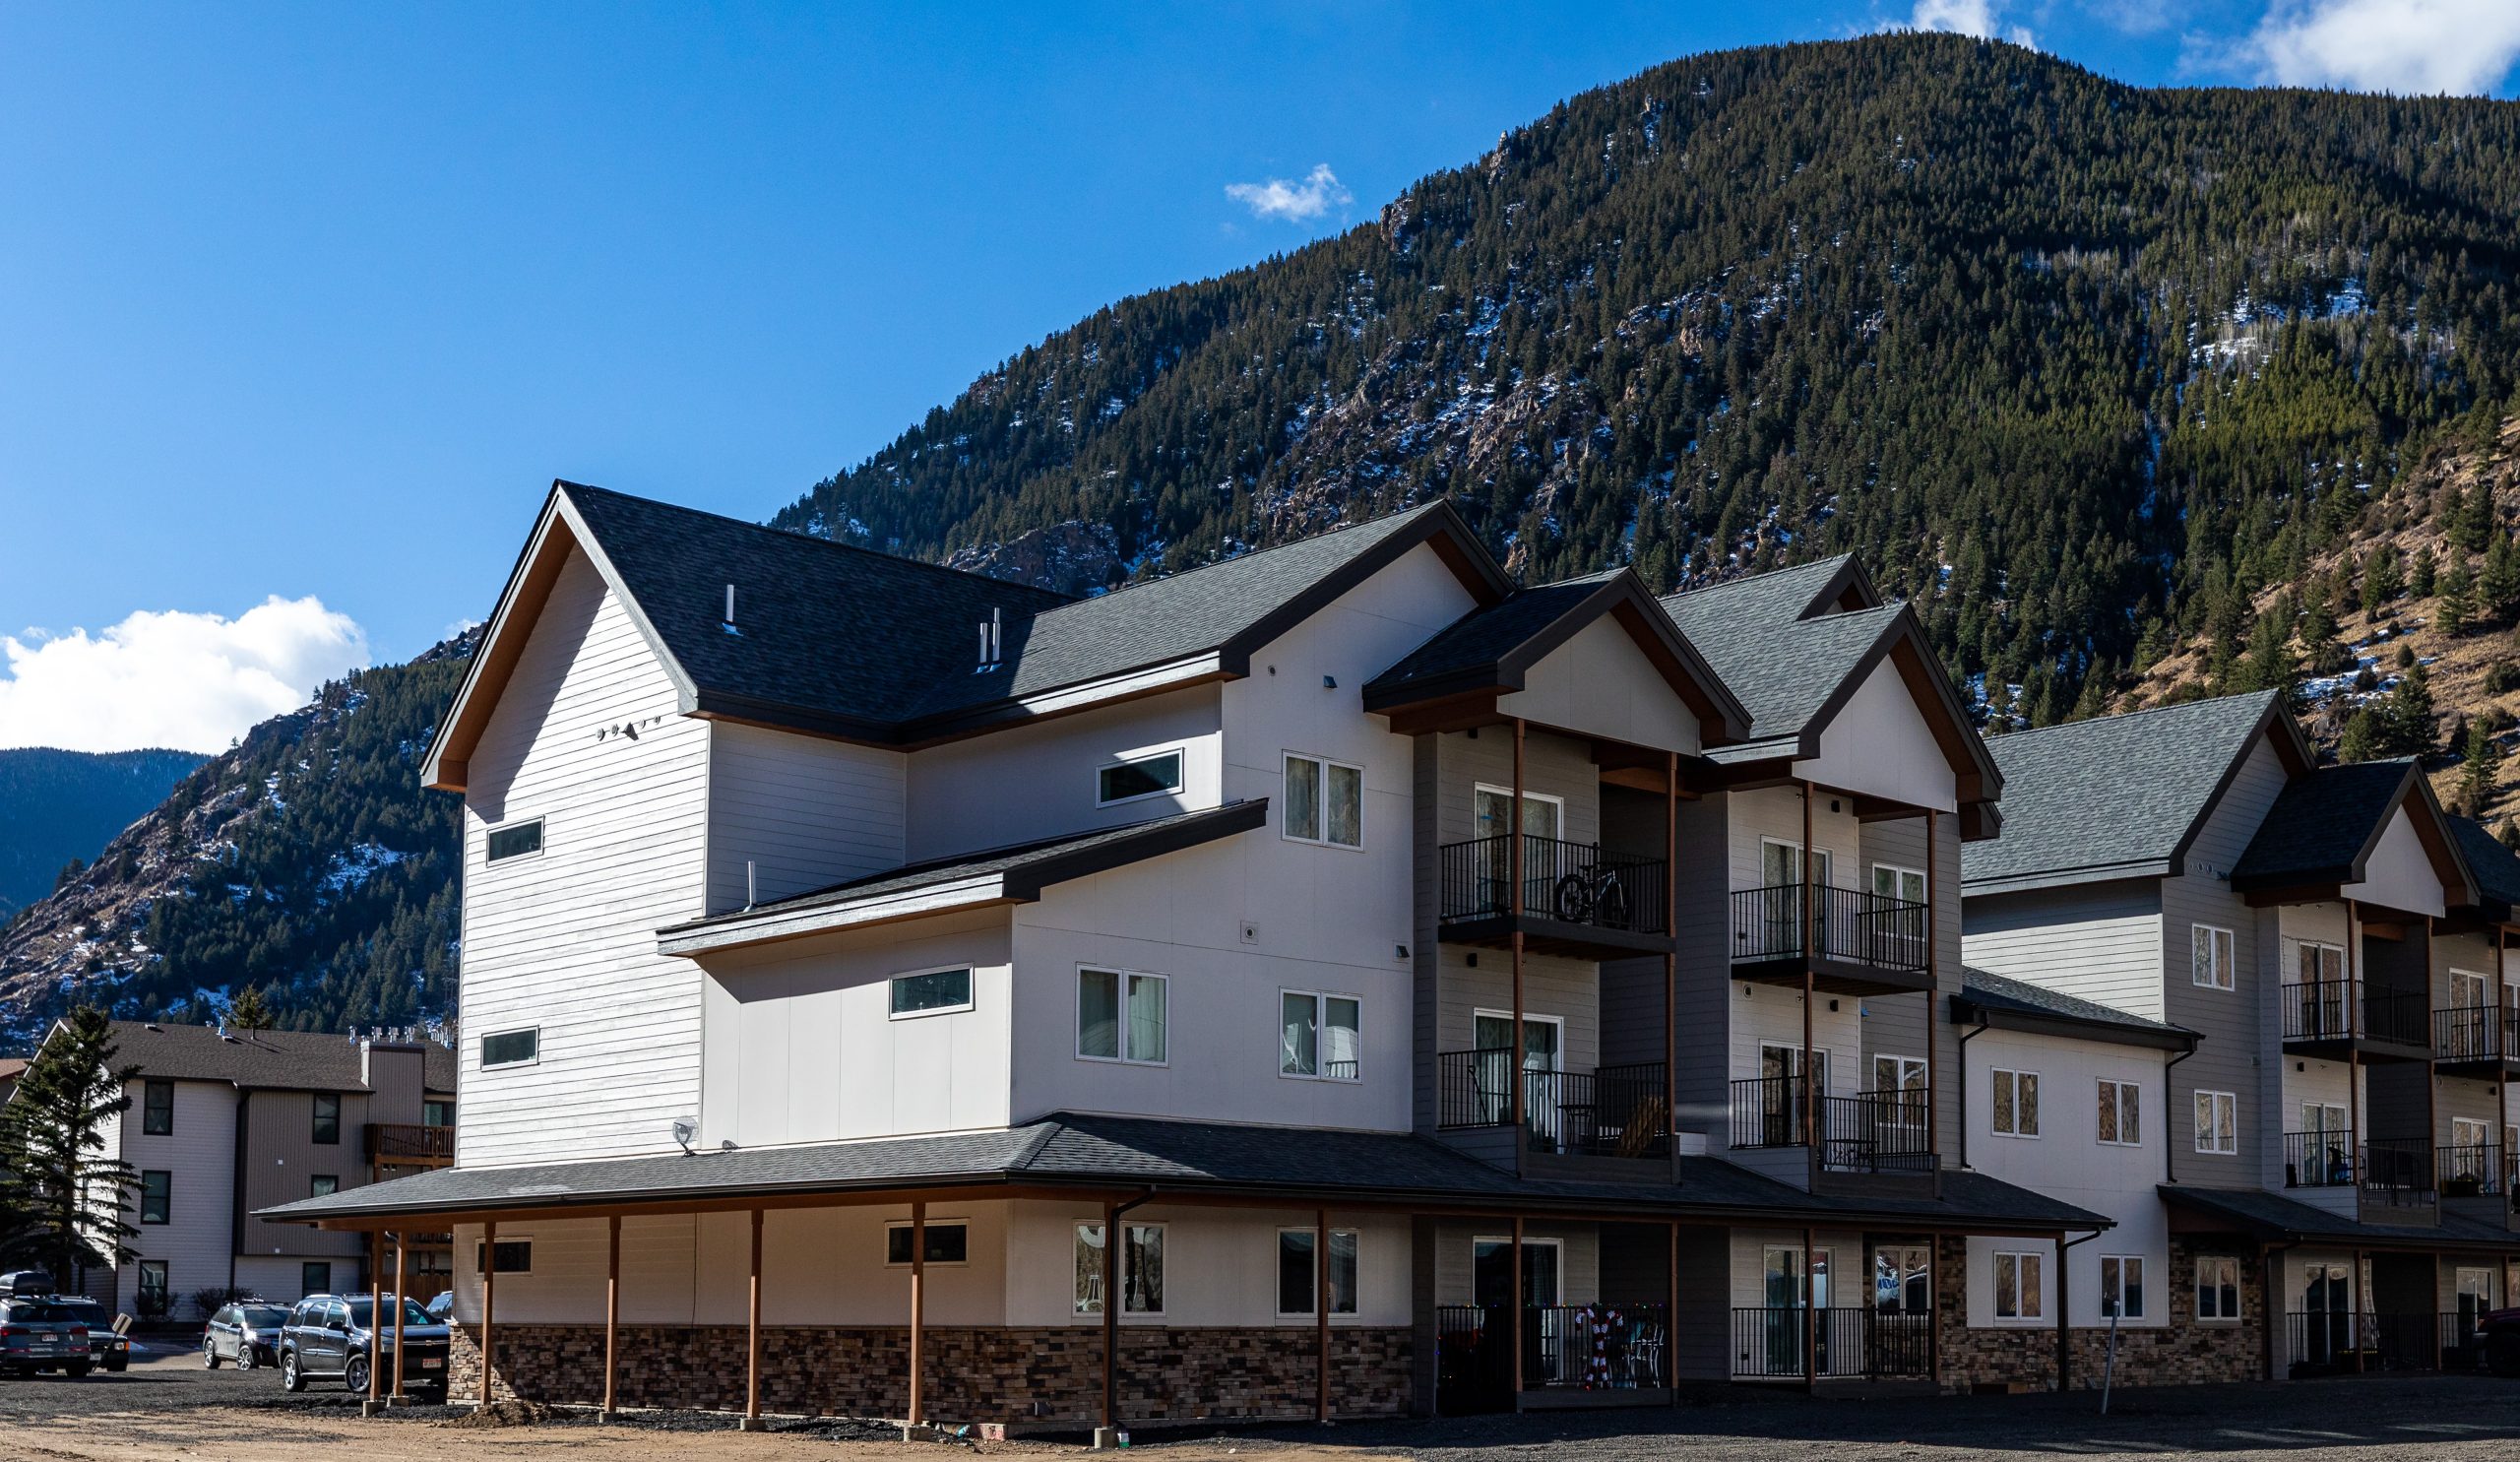 the building is white and has a mountain view at The Bighorn Crossing